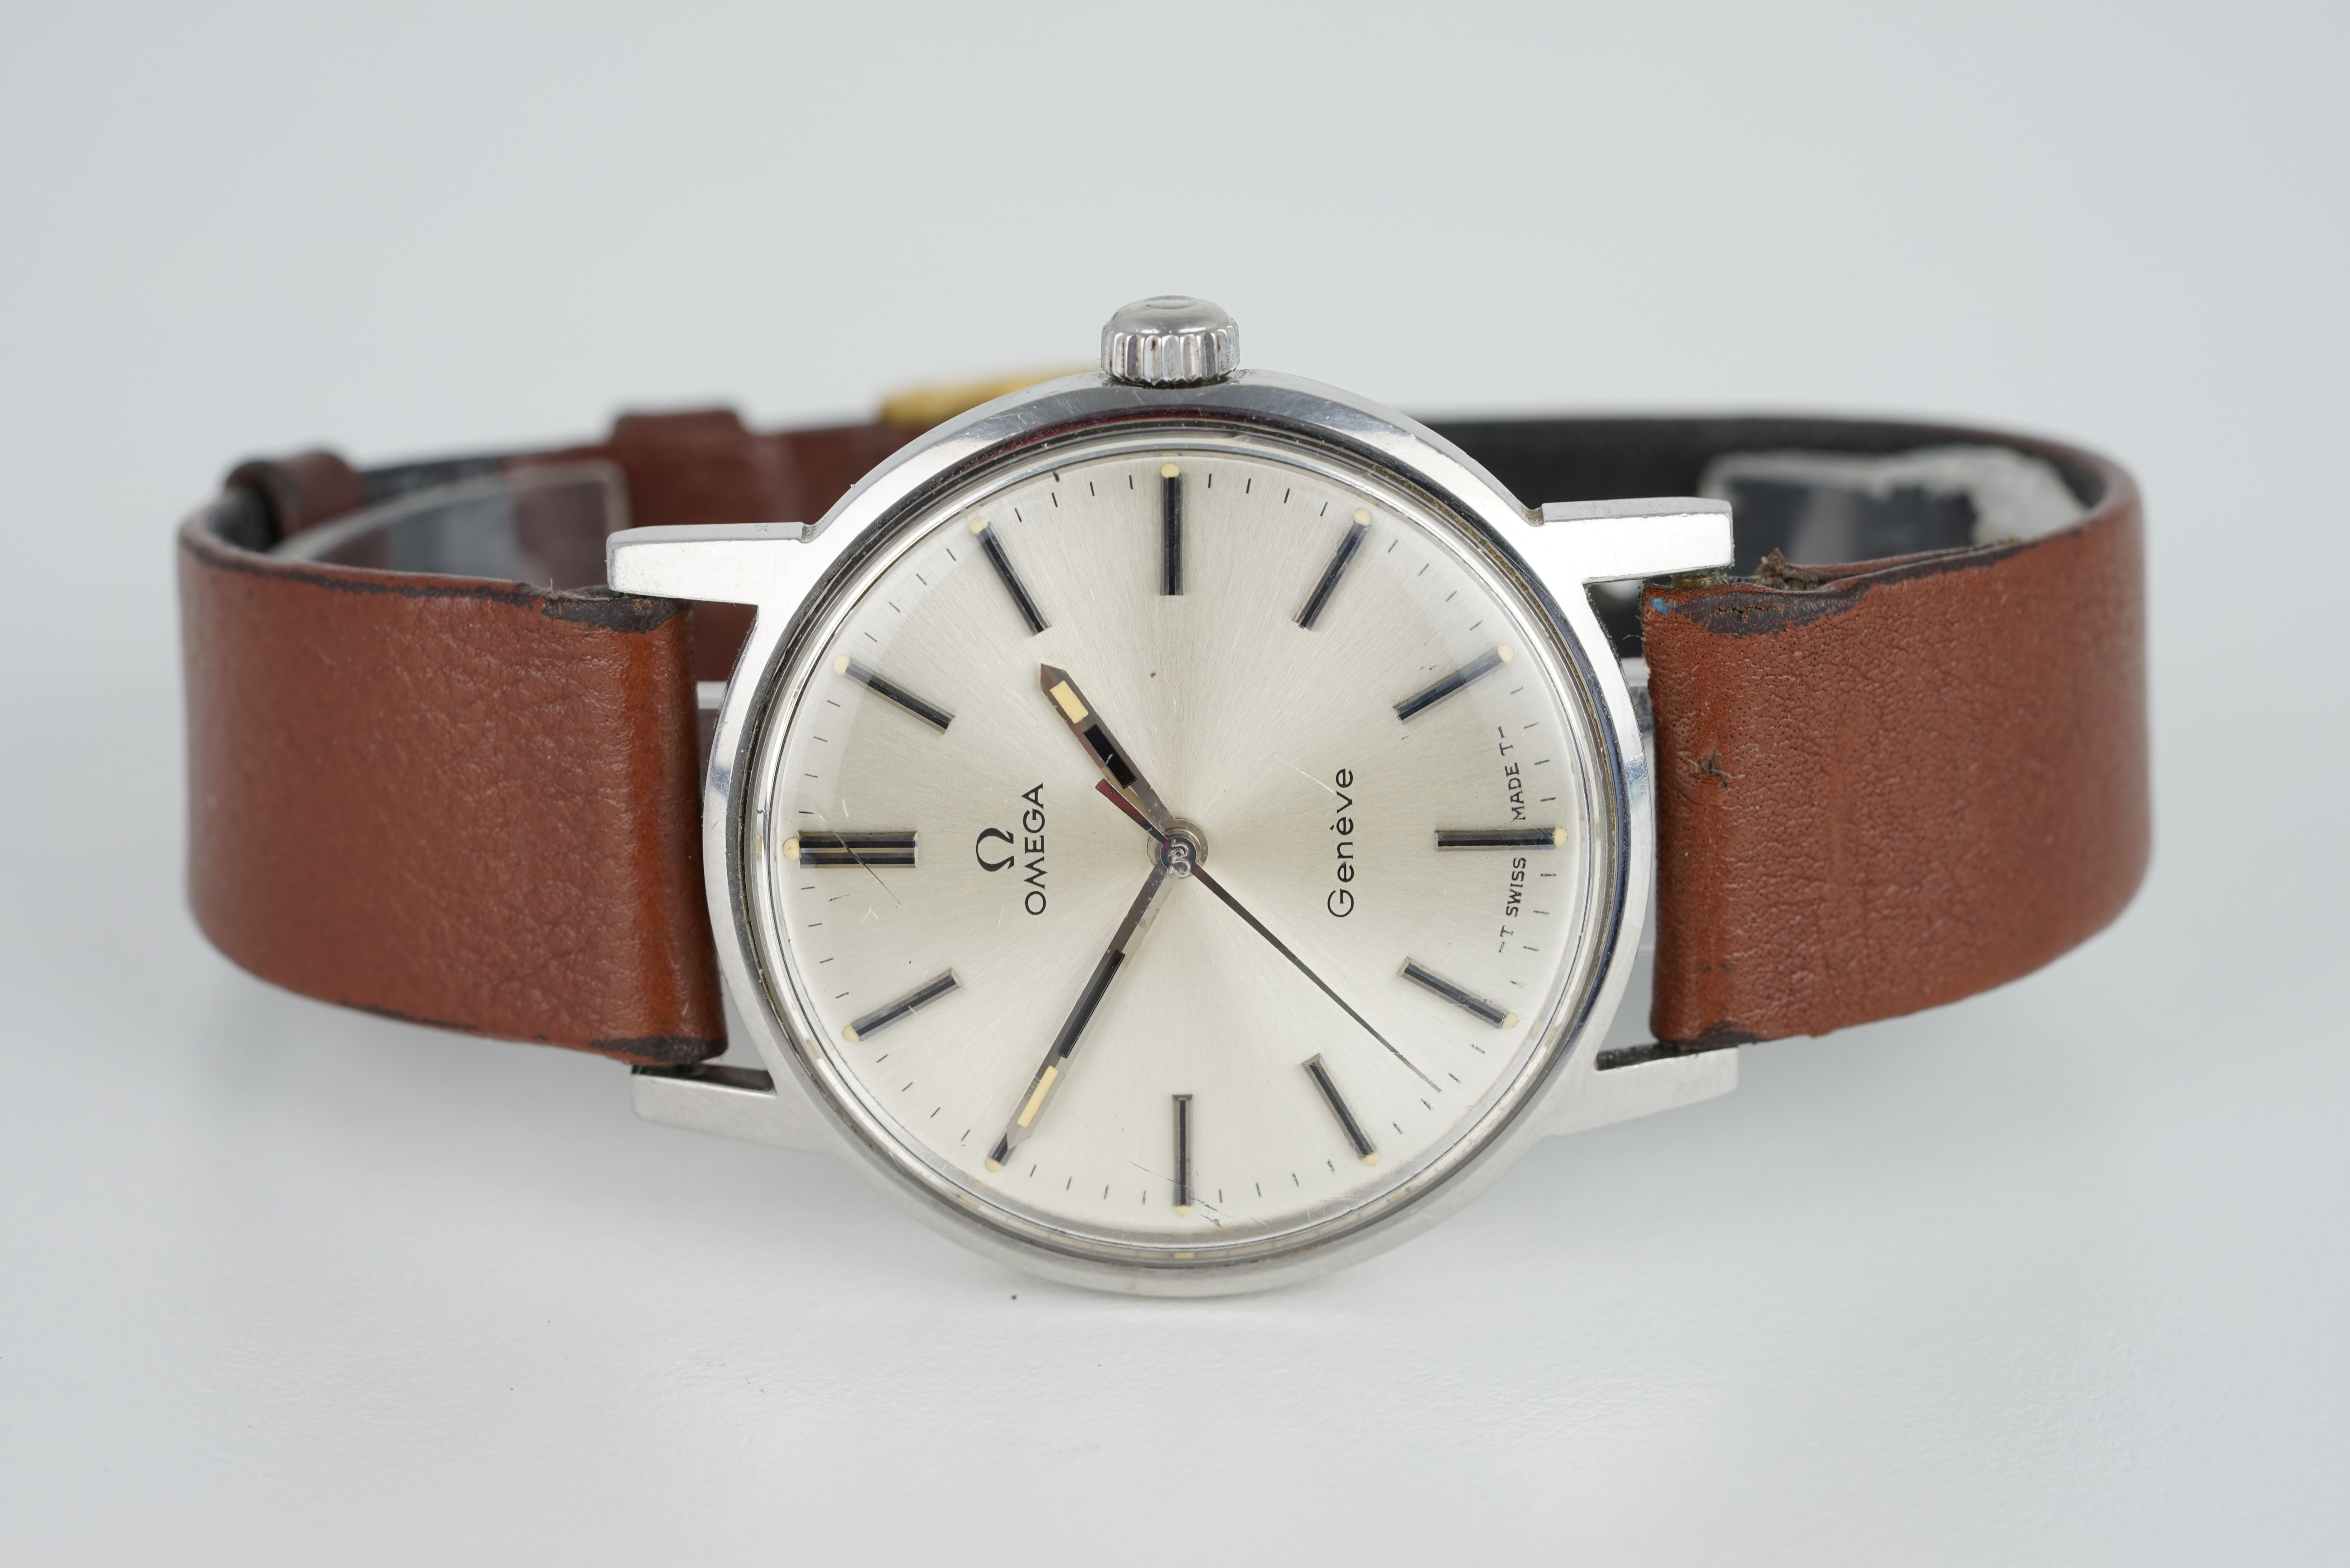 GENTLEMENS OMEGA GENEVE WRISTWATCH REF. 135.070, circular silver dial with hour markers and pencil